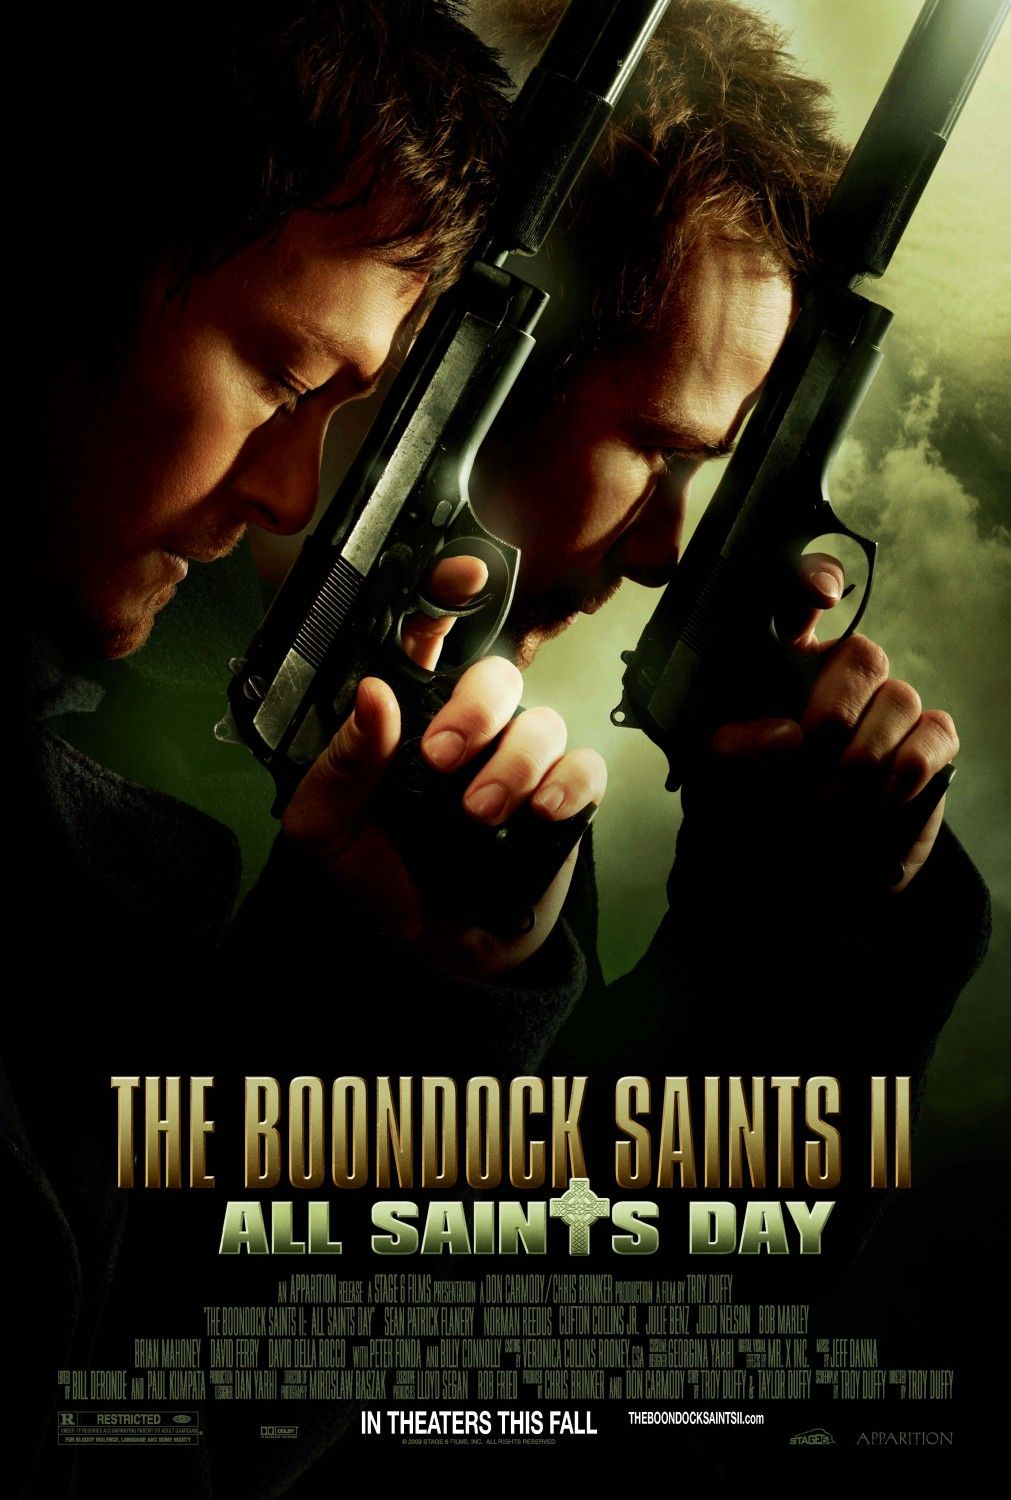 Extra Large Movie Poster Image for The Boondock Saints II: All Saints Day 